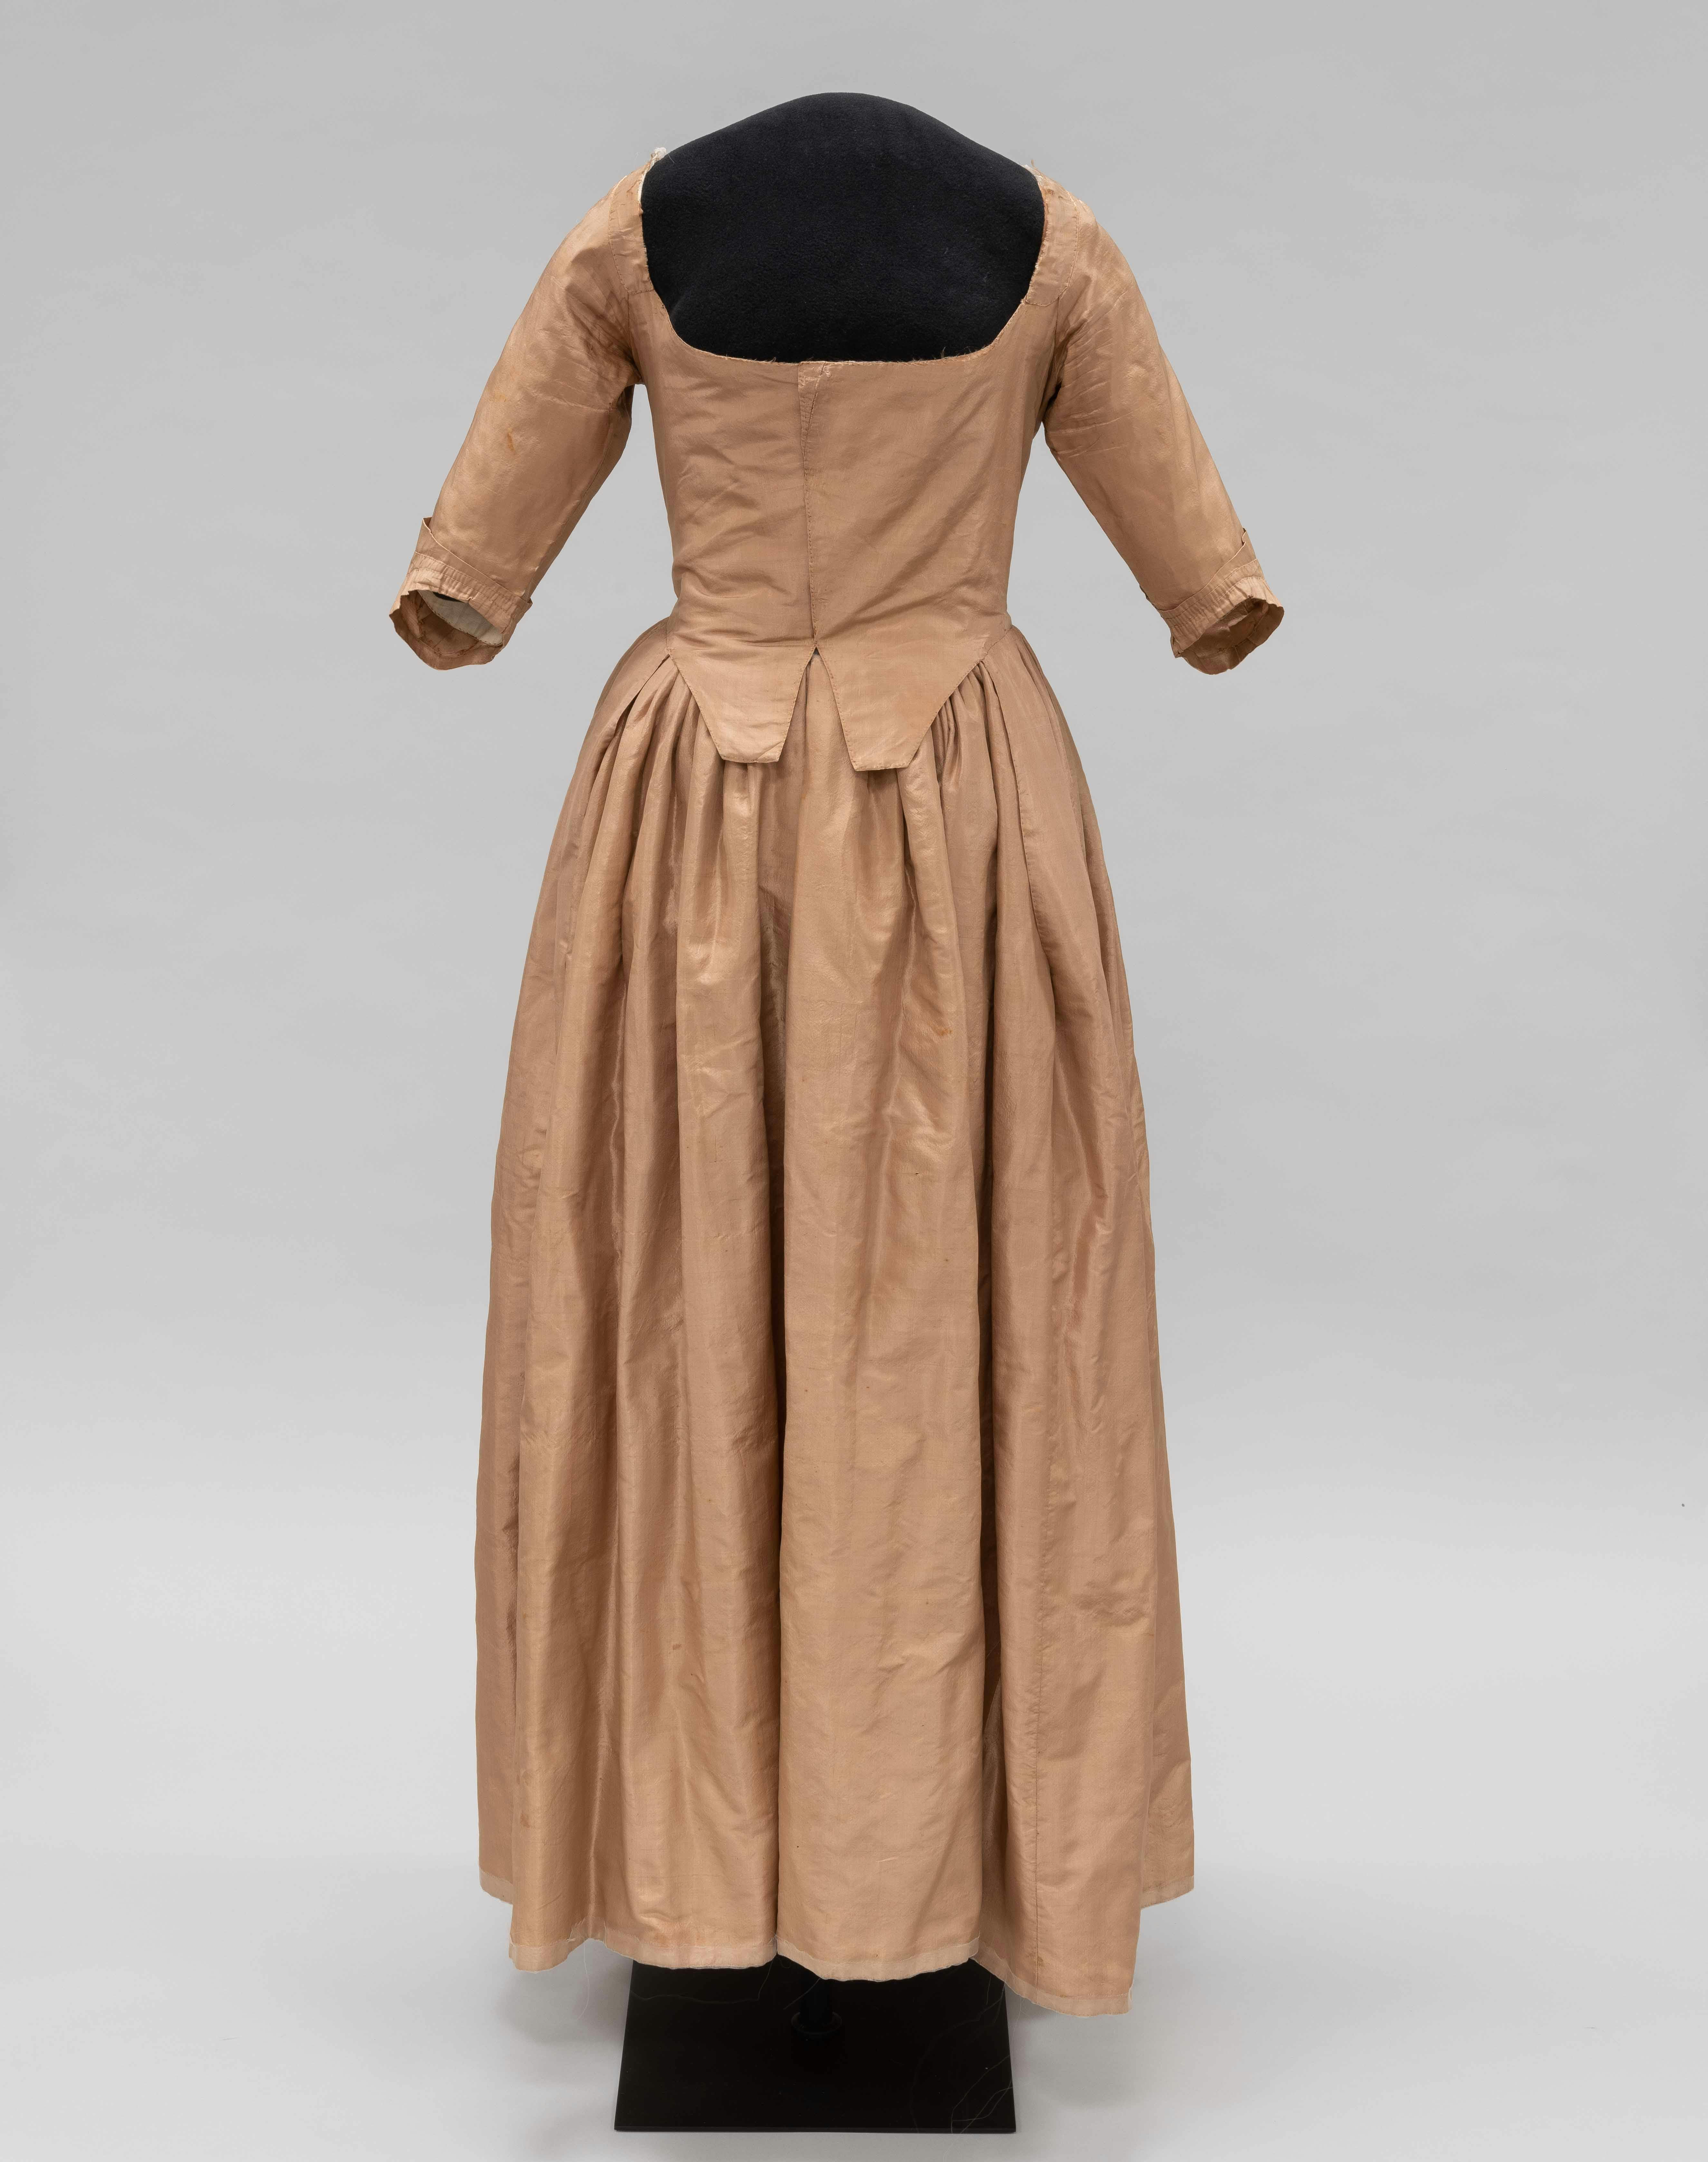 Photo of a round gown.